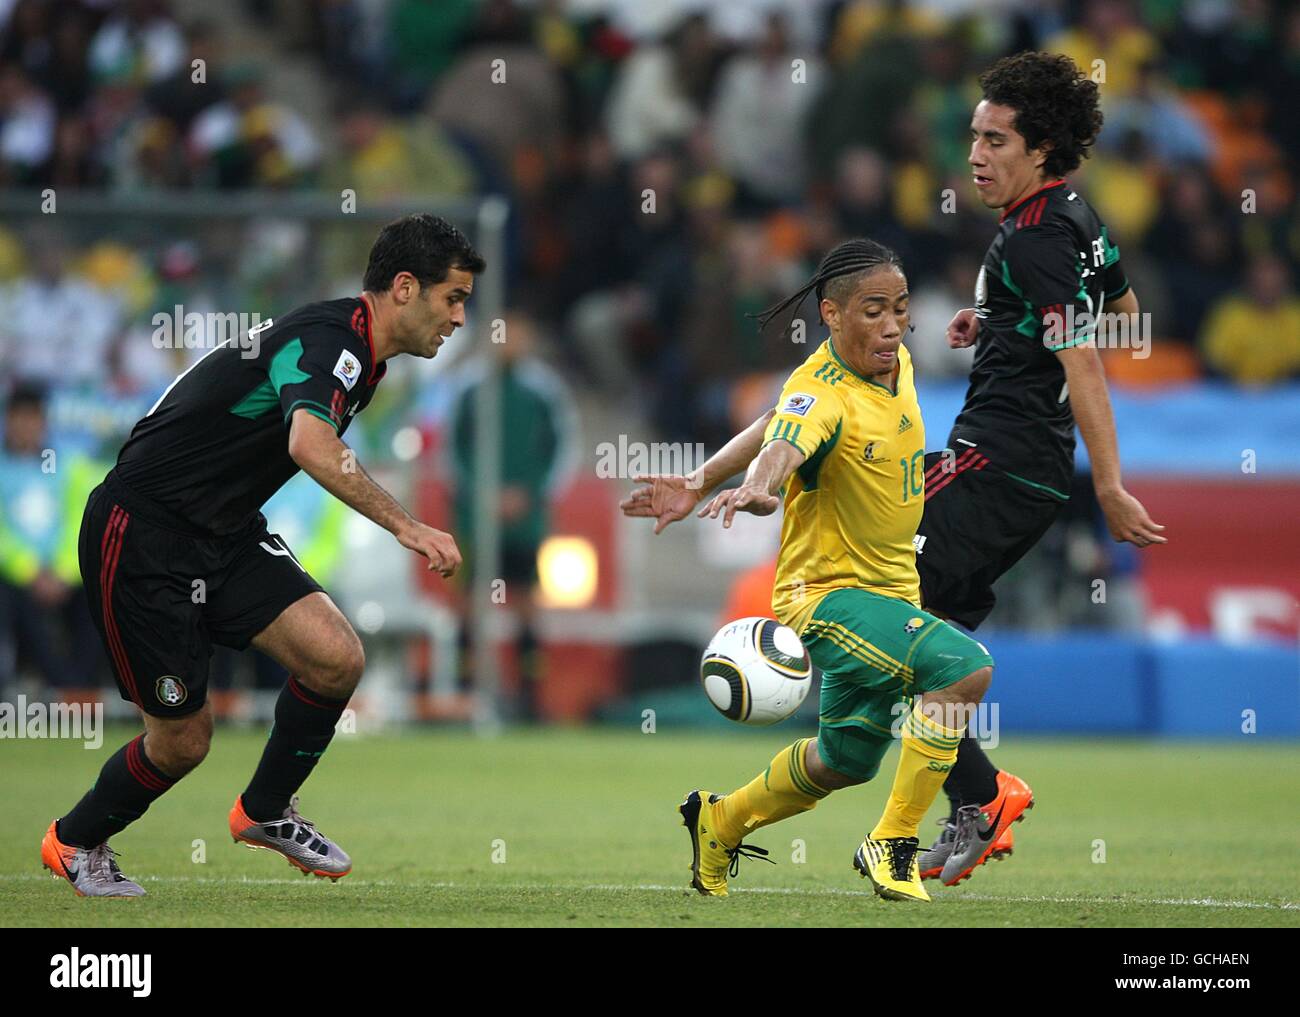 Soccer - 2010 FIFA World Cup South Africa - Group A - South Africa v Mexico - Soccer City Stadium. Mexico's Rafael Marquez (left) and Andres Guardado (right) battle for the ball with South Africa's Steven Pienaar (center) Stock Photo